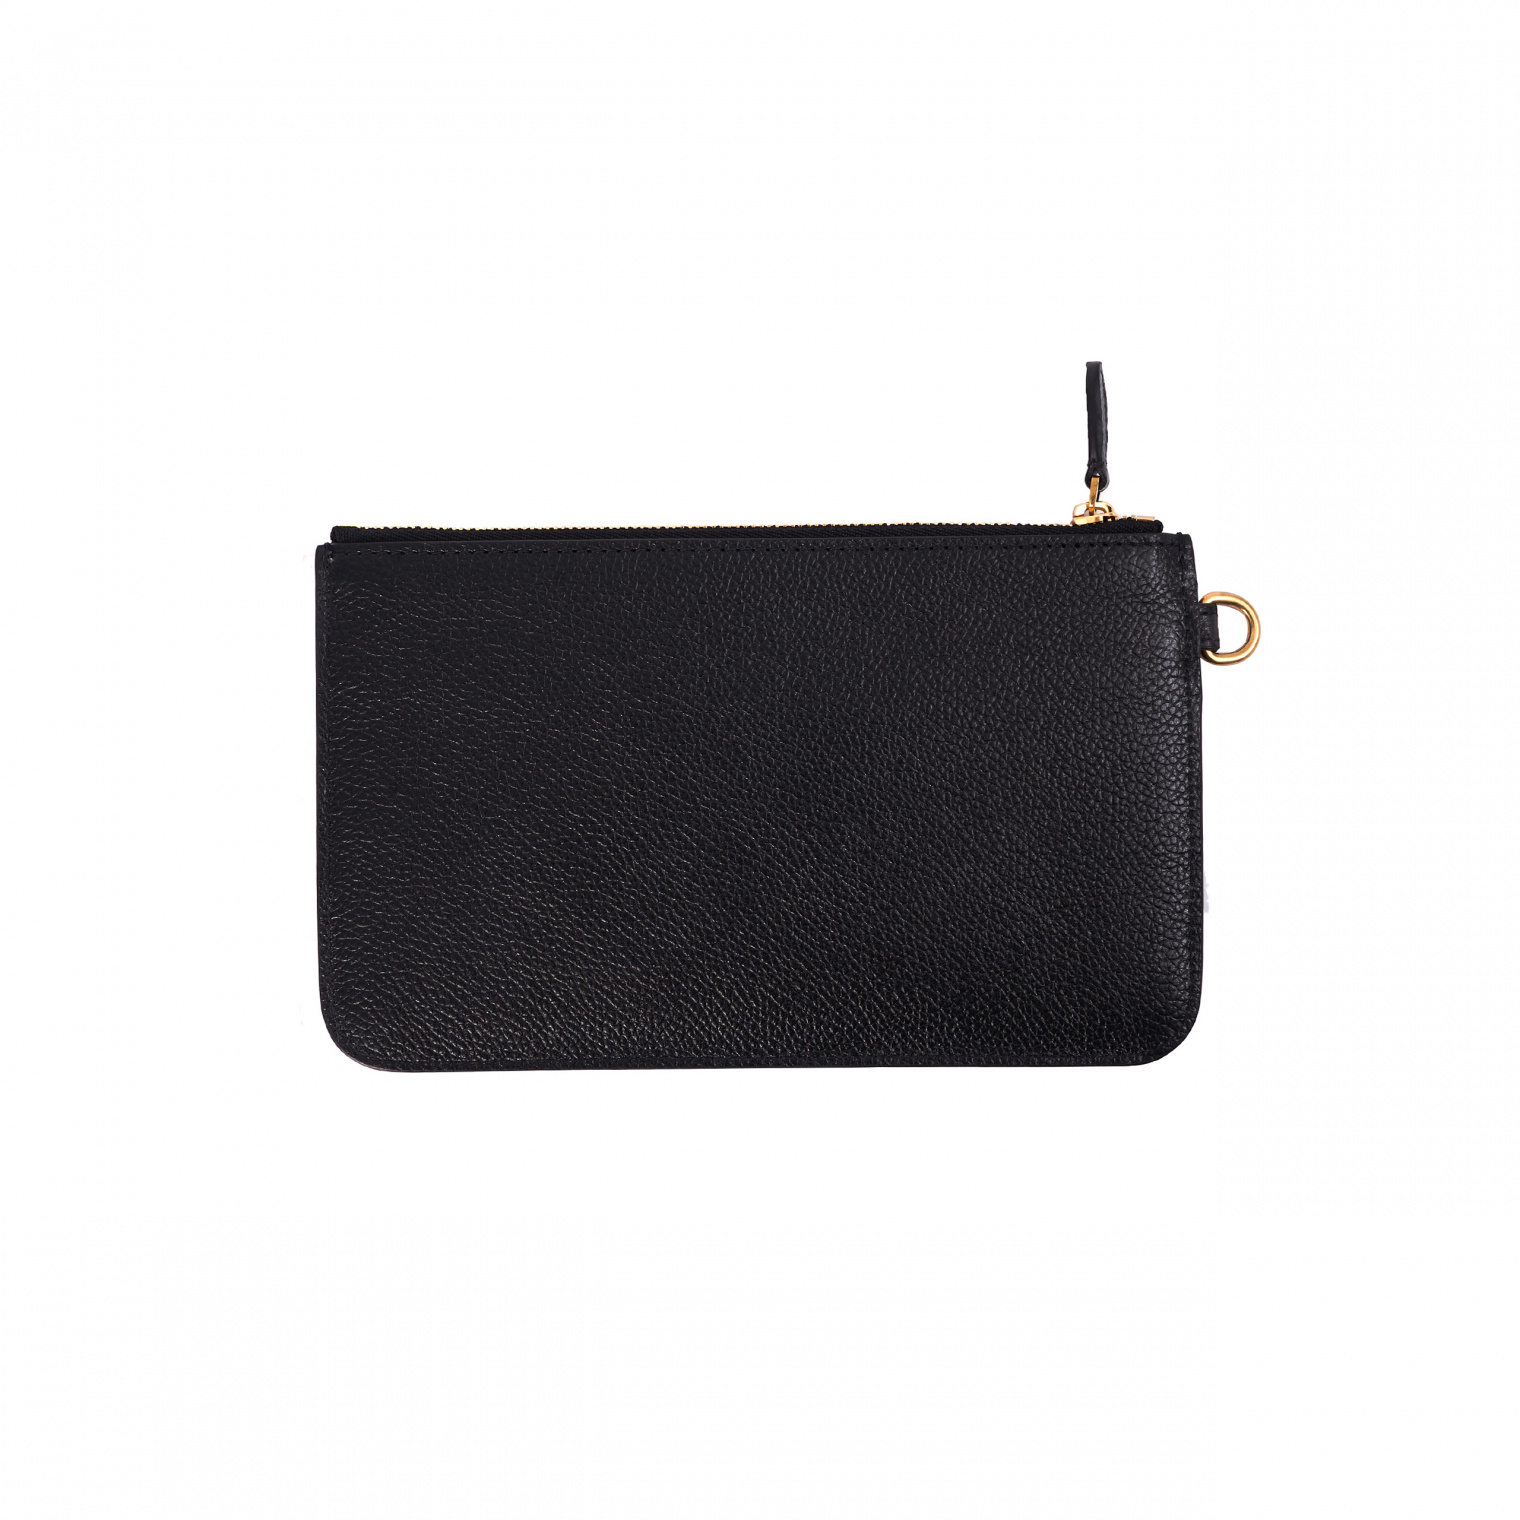 Balenciaga Cash Wallet in Black Grained Leather